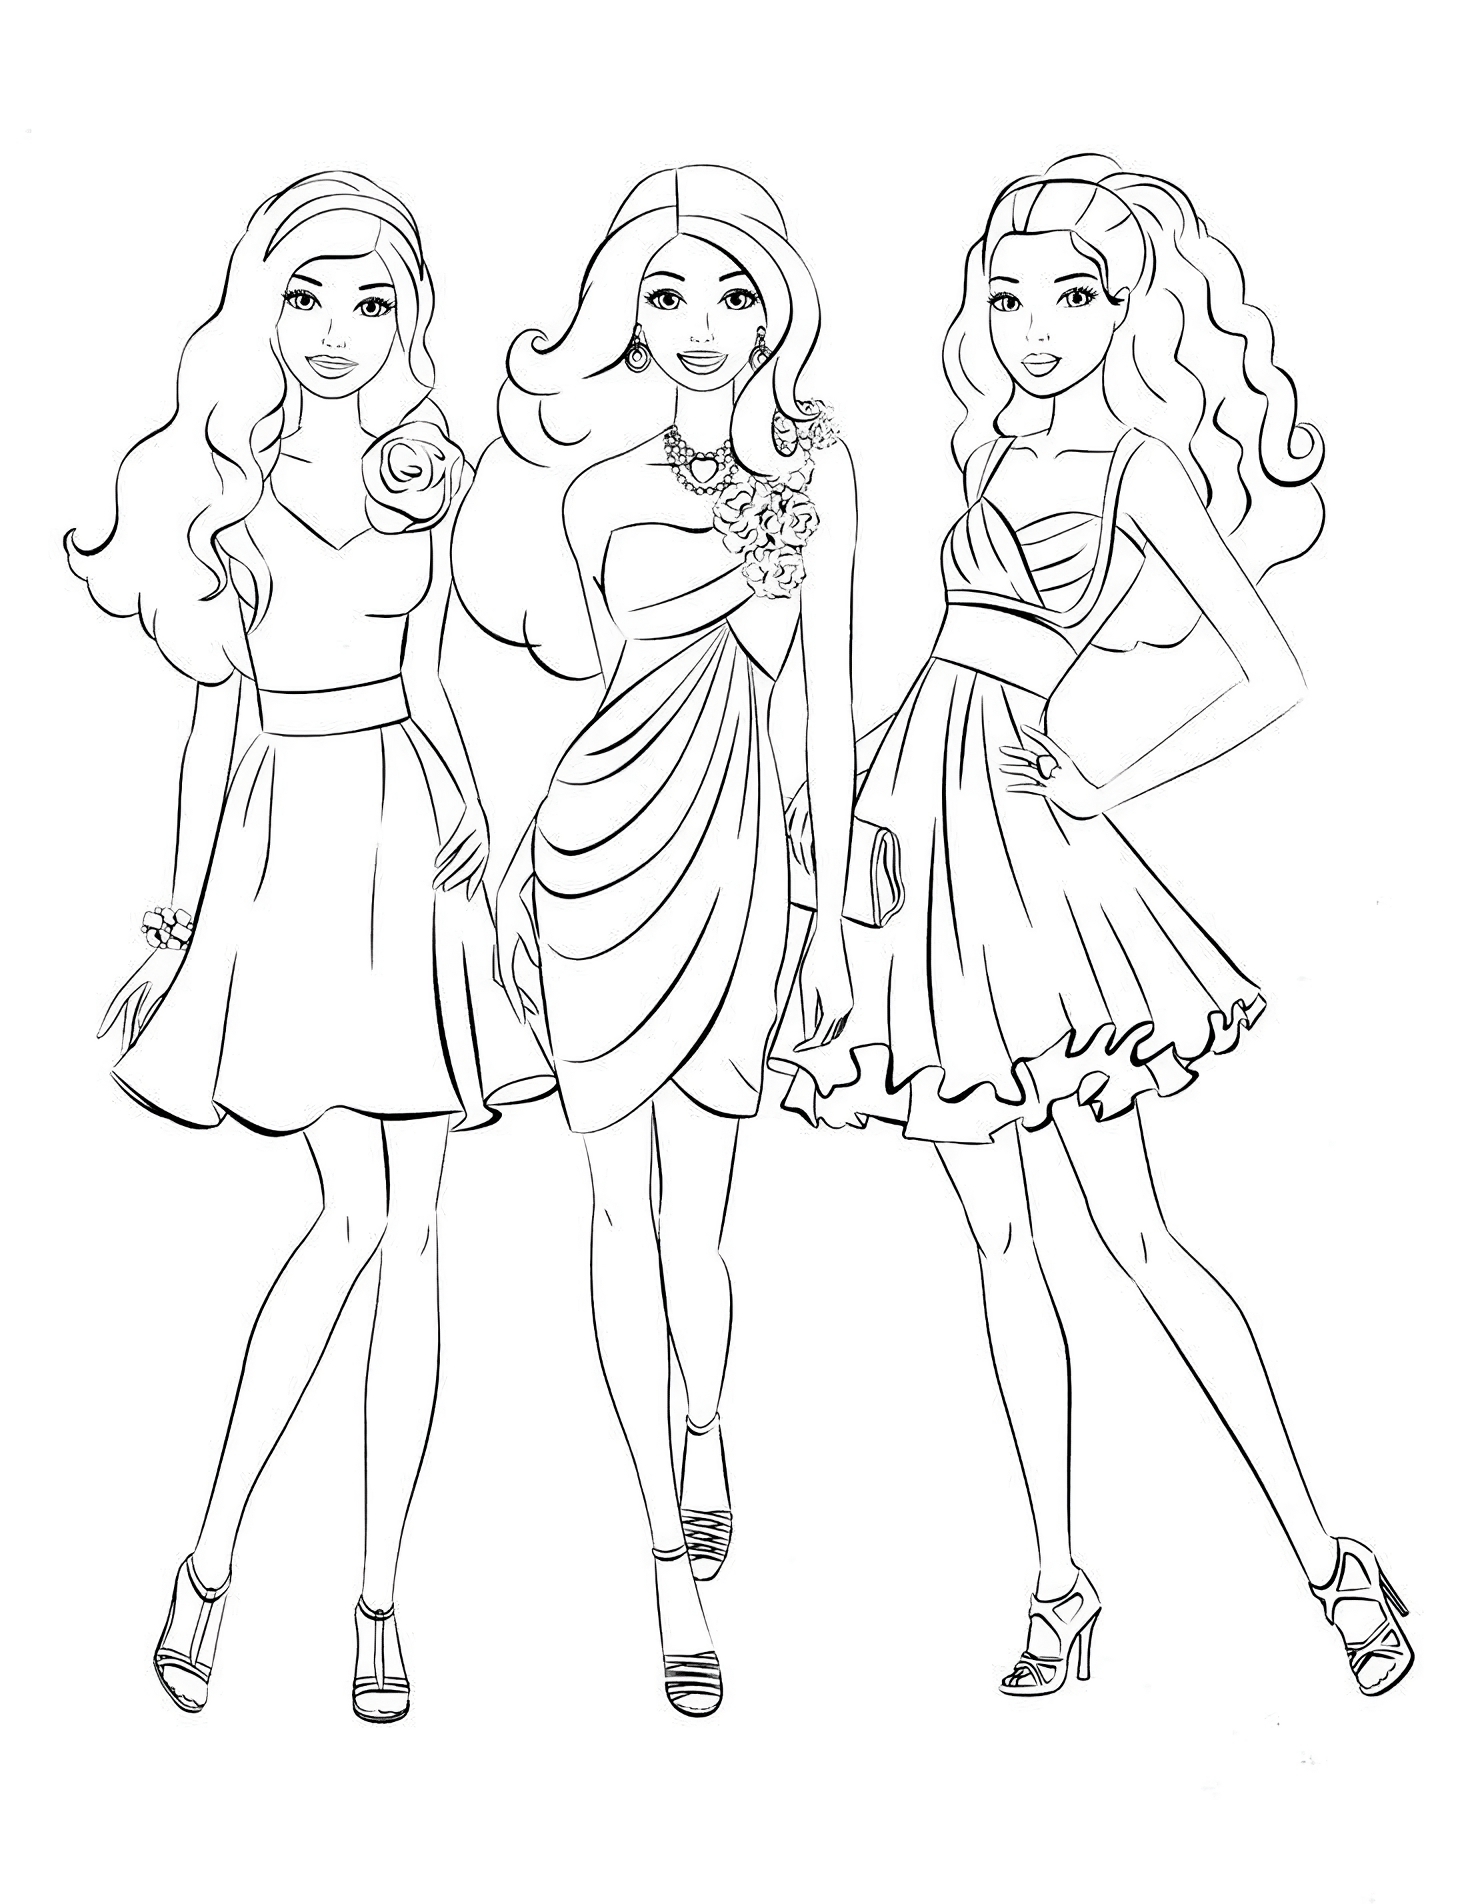 Barbie Fashion Queen Coloring Pages - High Quality Coloring Pages